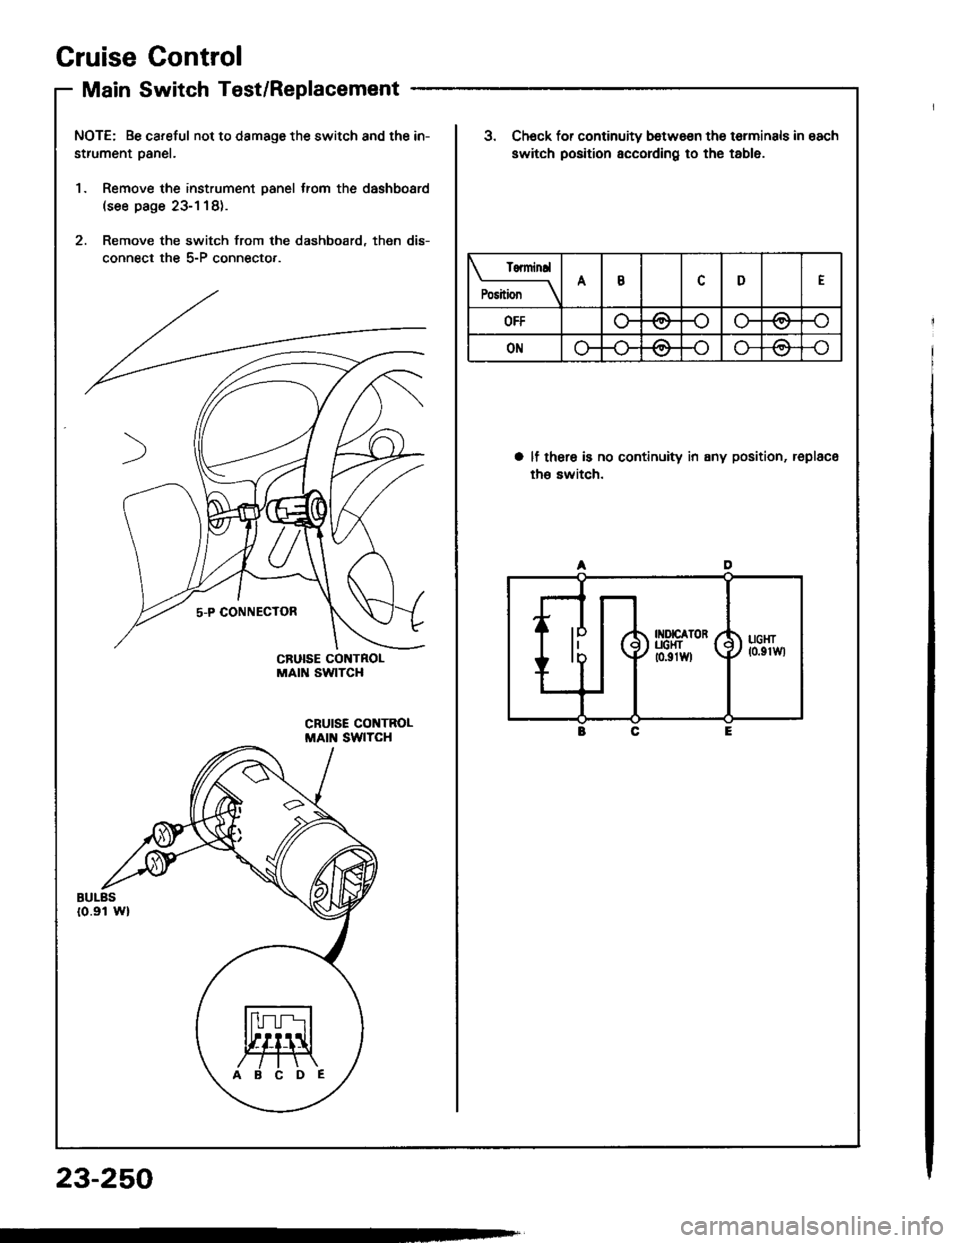 ACURA INTEGRA 1994  Service Repair Manual Cruise Gontrol
Main Switch Test/Replacement
NOTE: Be careful not to damage the switch and the in-
strument oanel.
1. Remove the instrument panel trom the dashboard(see page 23-1 18).
2. Remove the swi